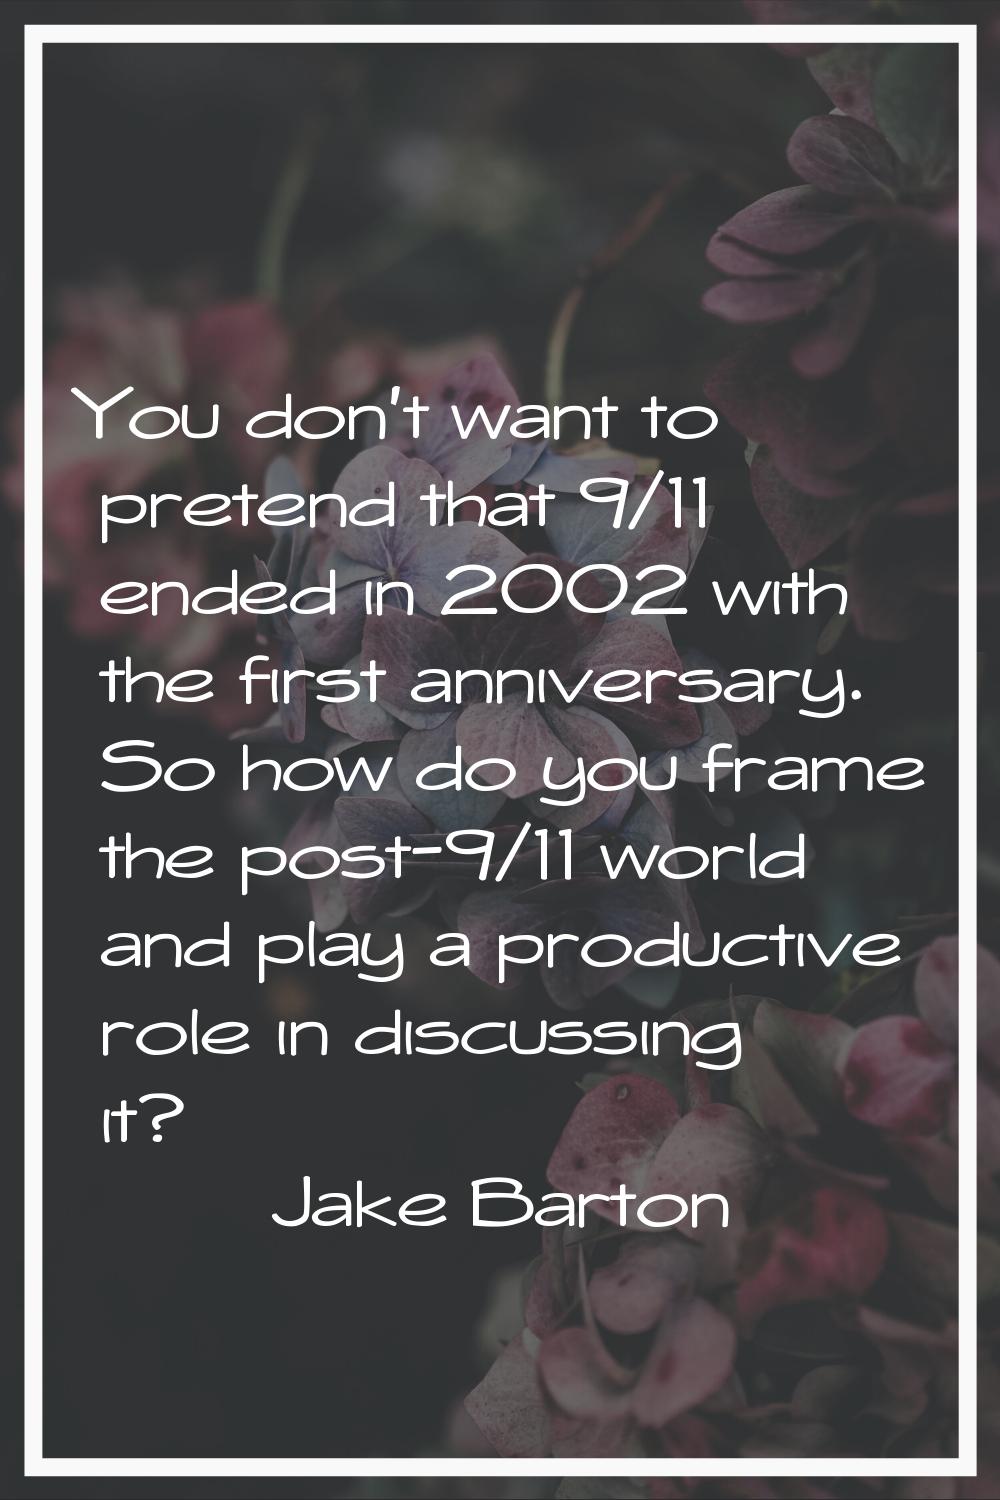 You don't want to pretend that 9/11 ended in 2002 with the first anniversary. So how do you frame t